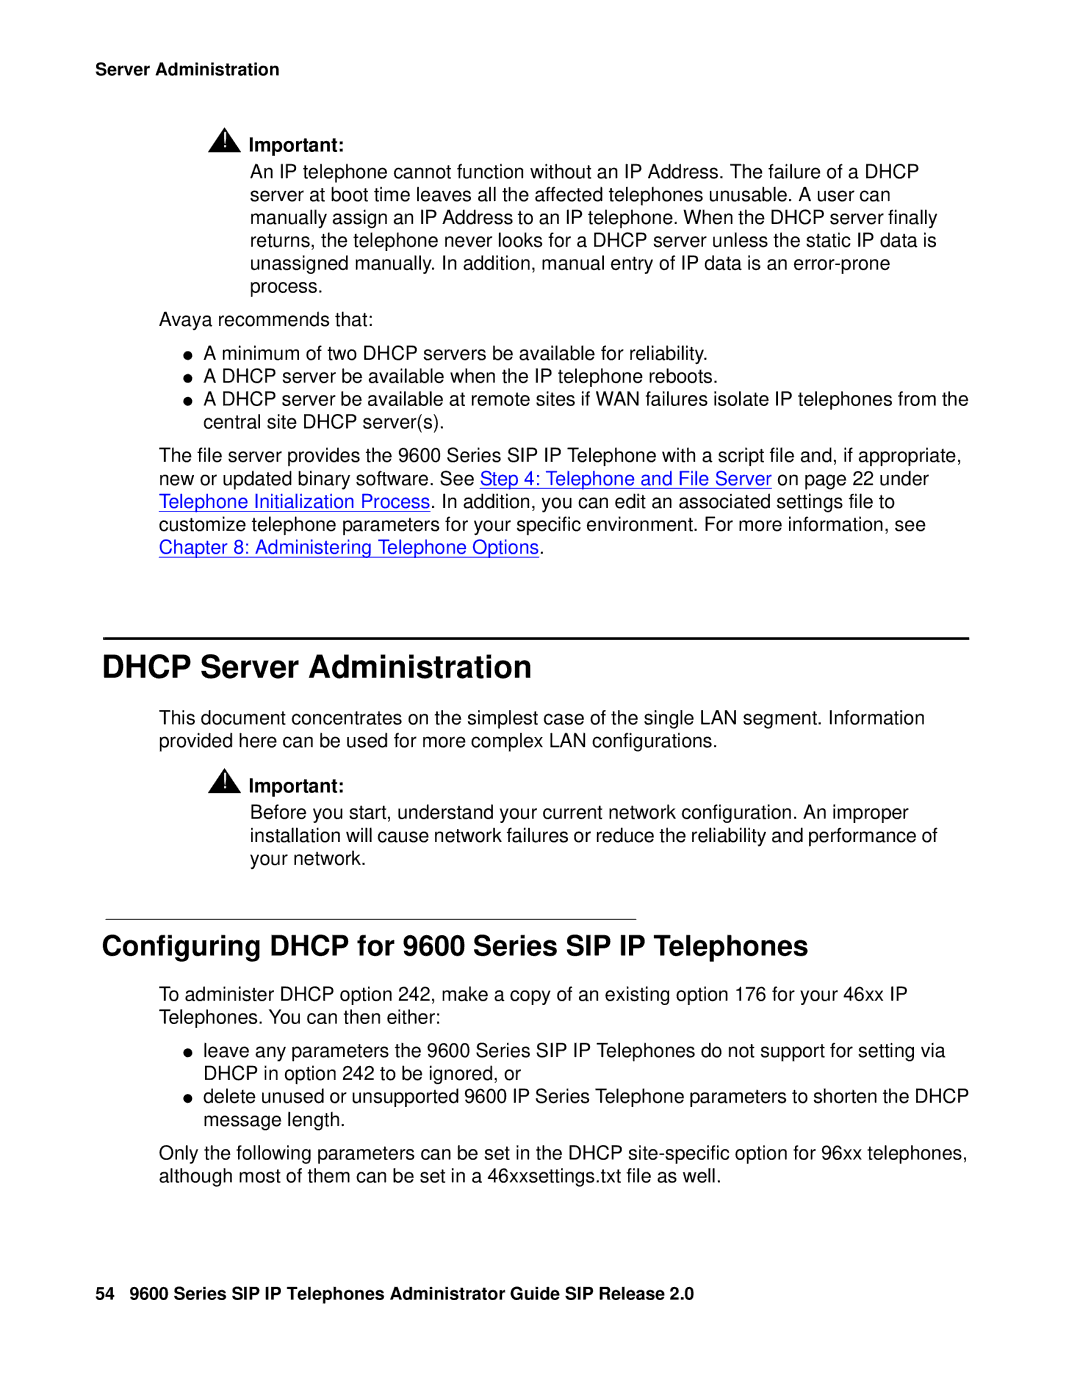 Avaya manual Dhcp Server Administration, Configuring Dhcp for 9600 Series SIP IP Telephones 